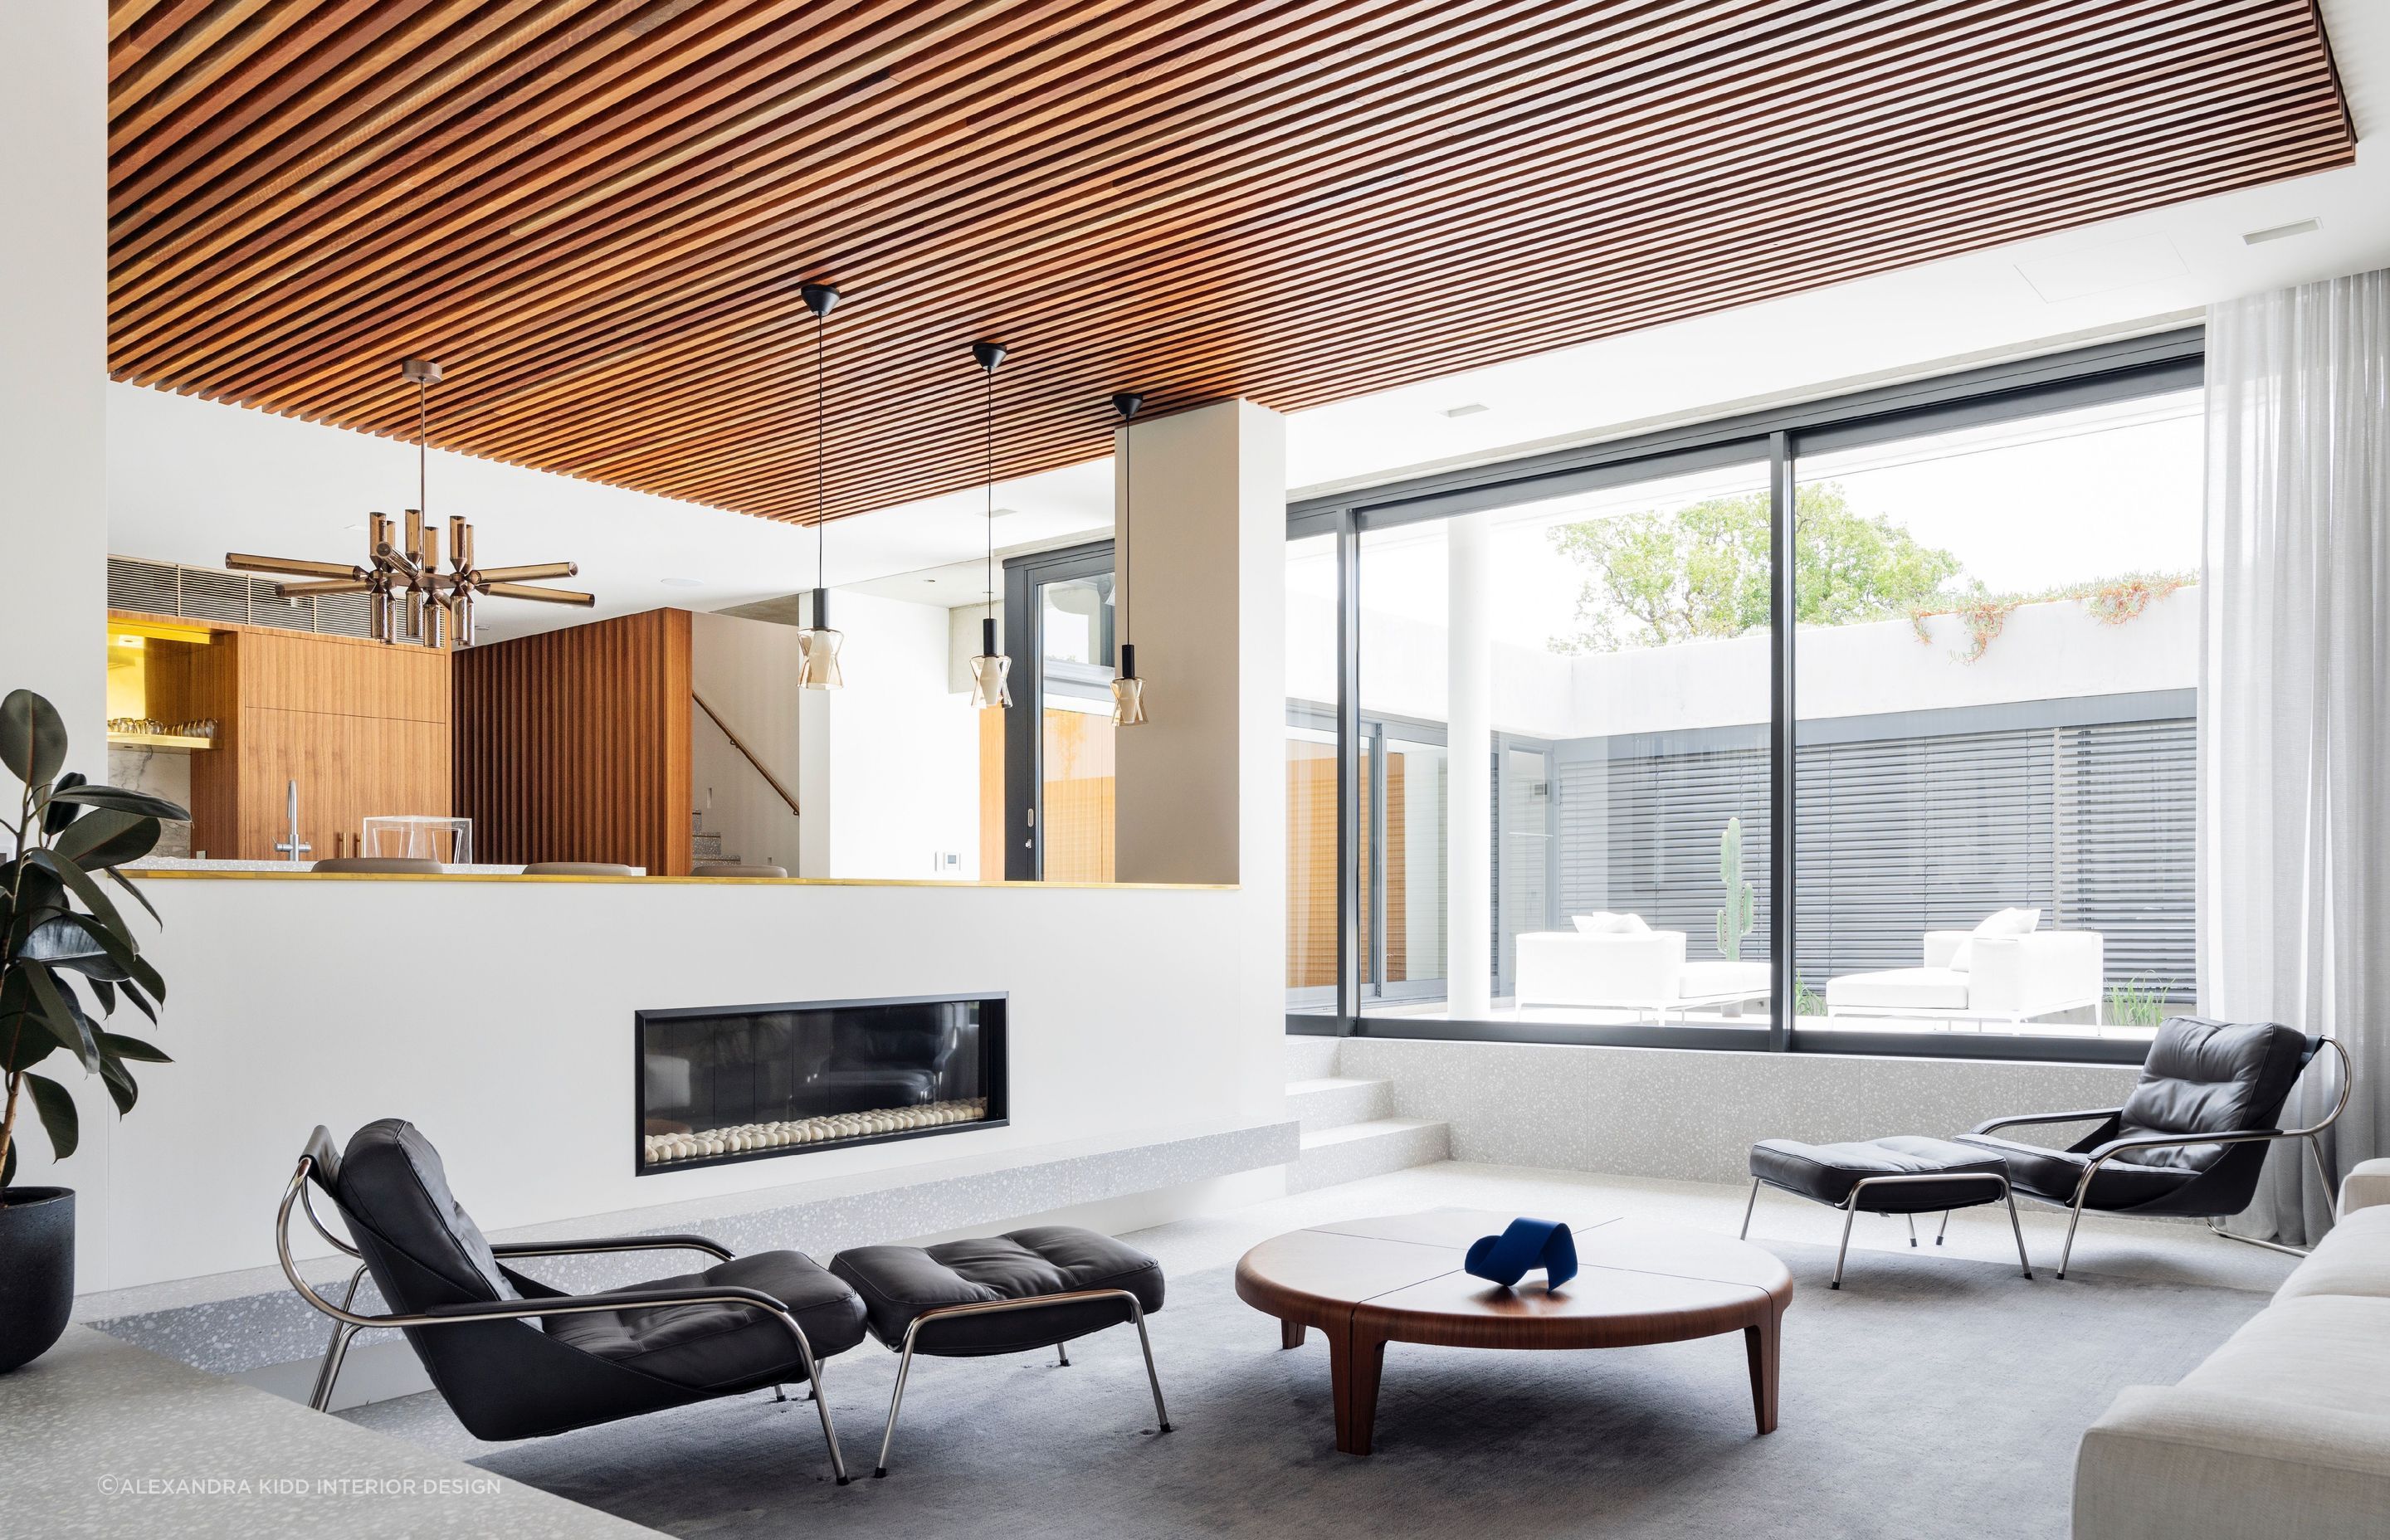 Natural stone and wood have a strong presence in this exquisite Mid-Century House - Photography: Justin Alexander